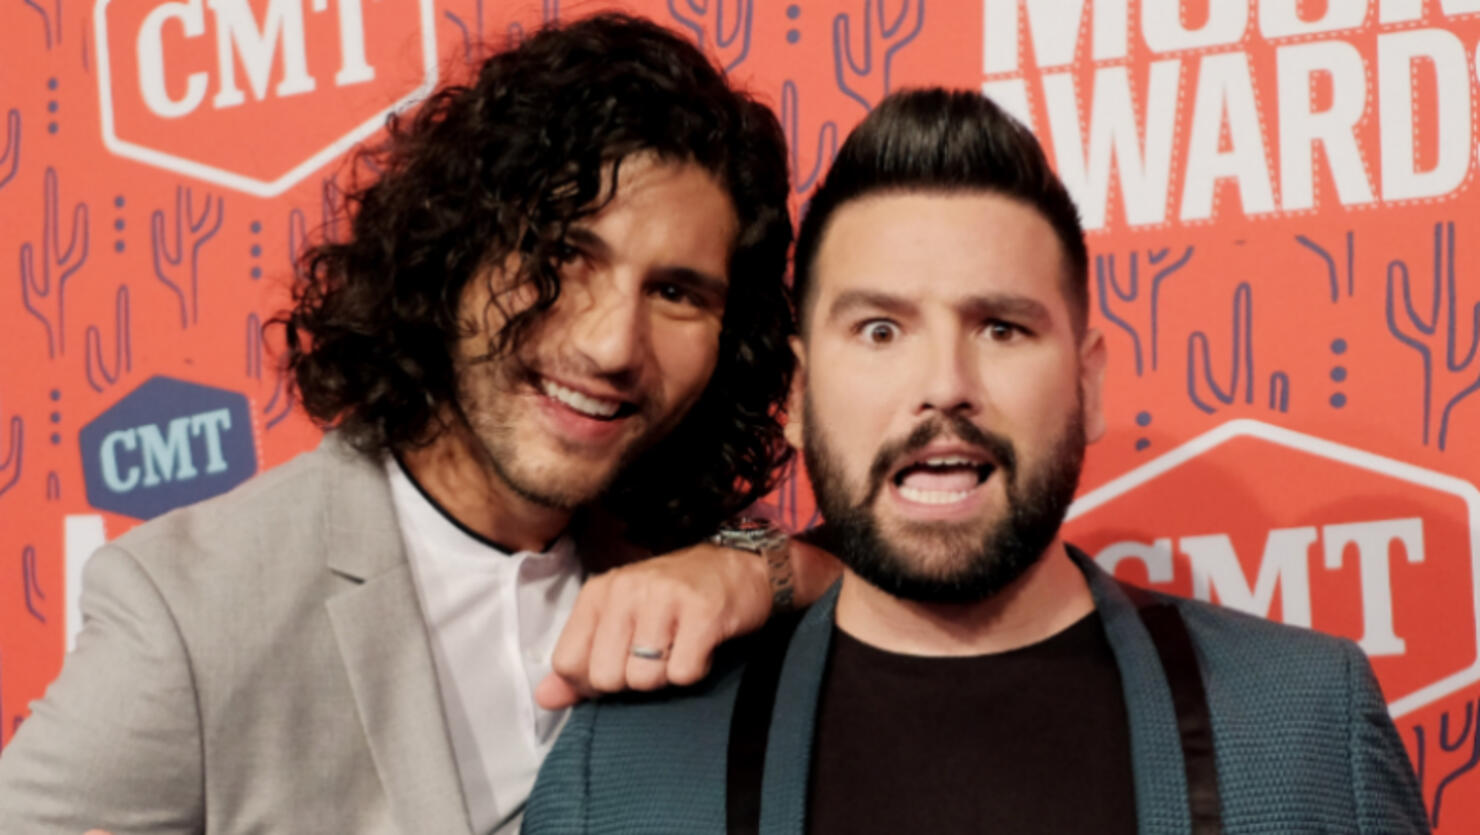 Dan + Shay's CMT Music Awards Performance Ends With Fireworks